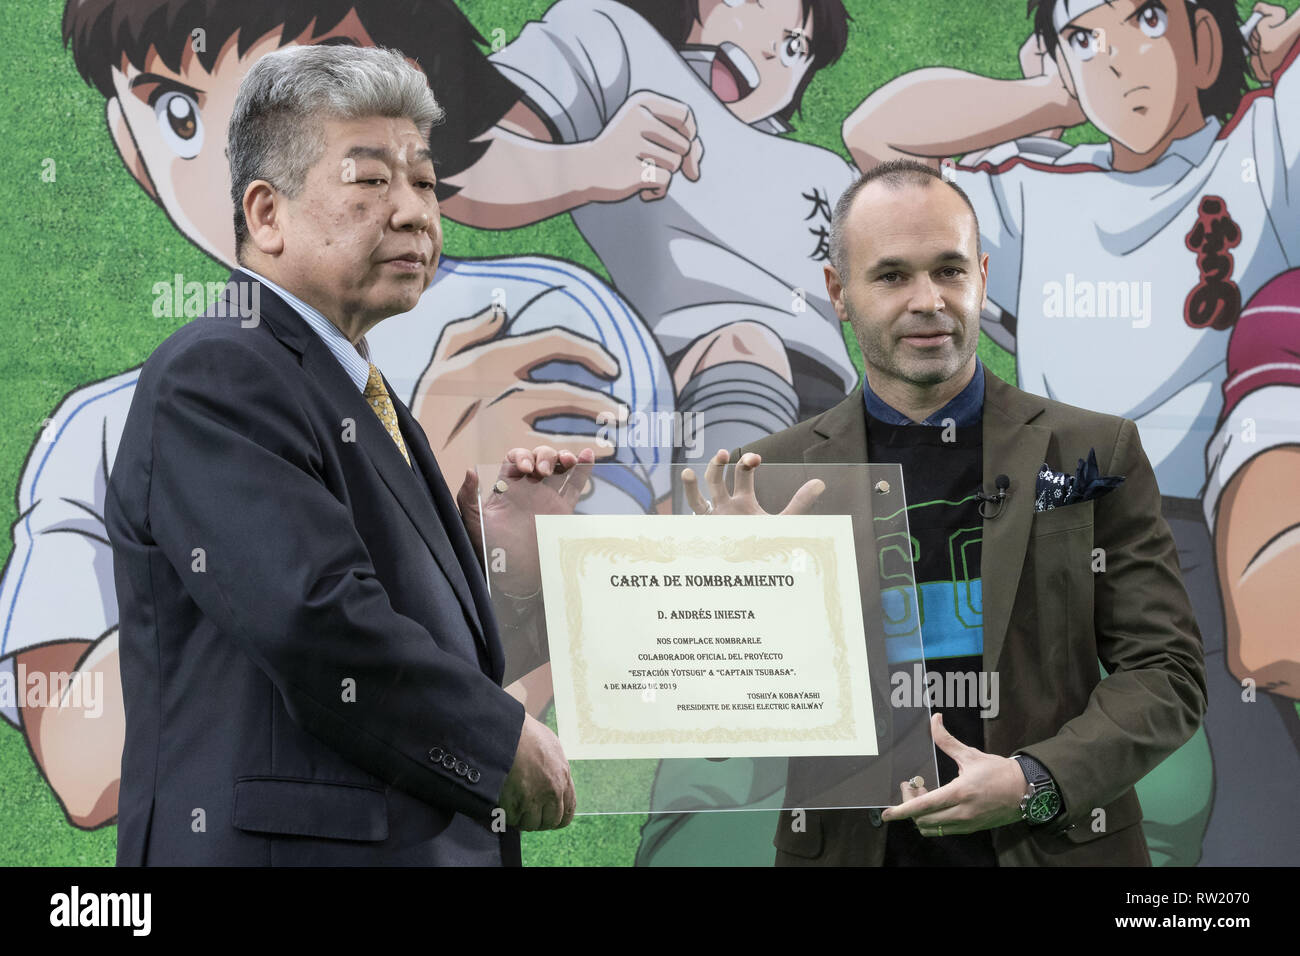 Tokyo, Japan. 4th Mar, 2019. Barcelona legend playmaker Andres Iniesta receives an Official Collaborator title during an opening ceremony for the Yotsugi Station and Captain Tsubasa project. Iniesta was named Official Collaborator for the Yotsugi Station and Captain Tsubasa project, which aims to promote the tourism in the ward of Katsushika, the hometown of Yoichi Takahashi author of the Captain Tsubasa manga. Iniesta who is playing for the Japanese football club Vissel Kobe also visited the Yotsugi Station to see Captain Tsubasa manga characters decorating the interior of the train station Stock Photo